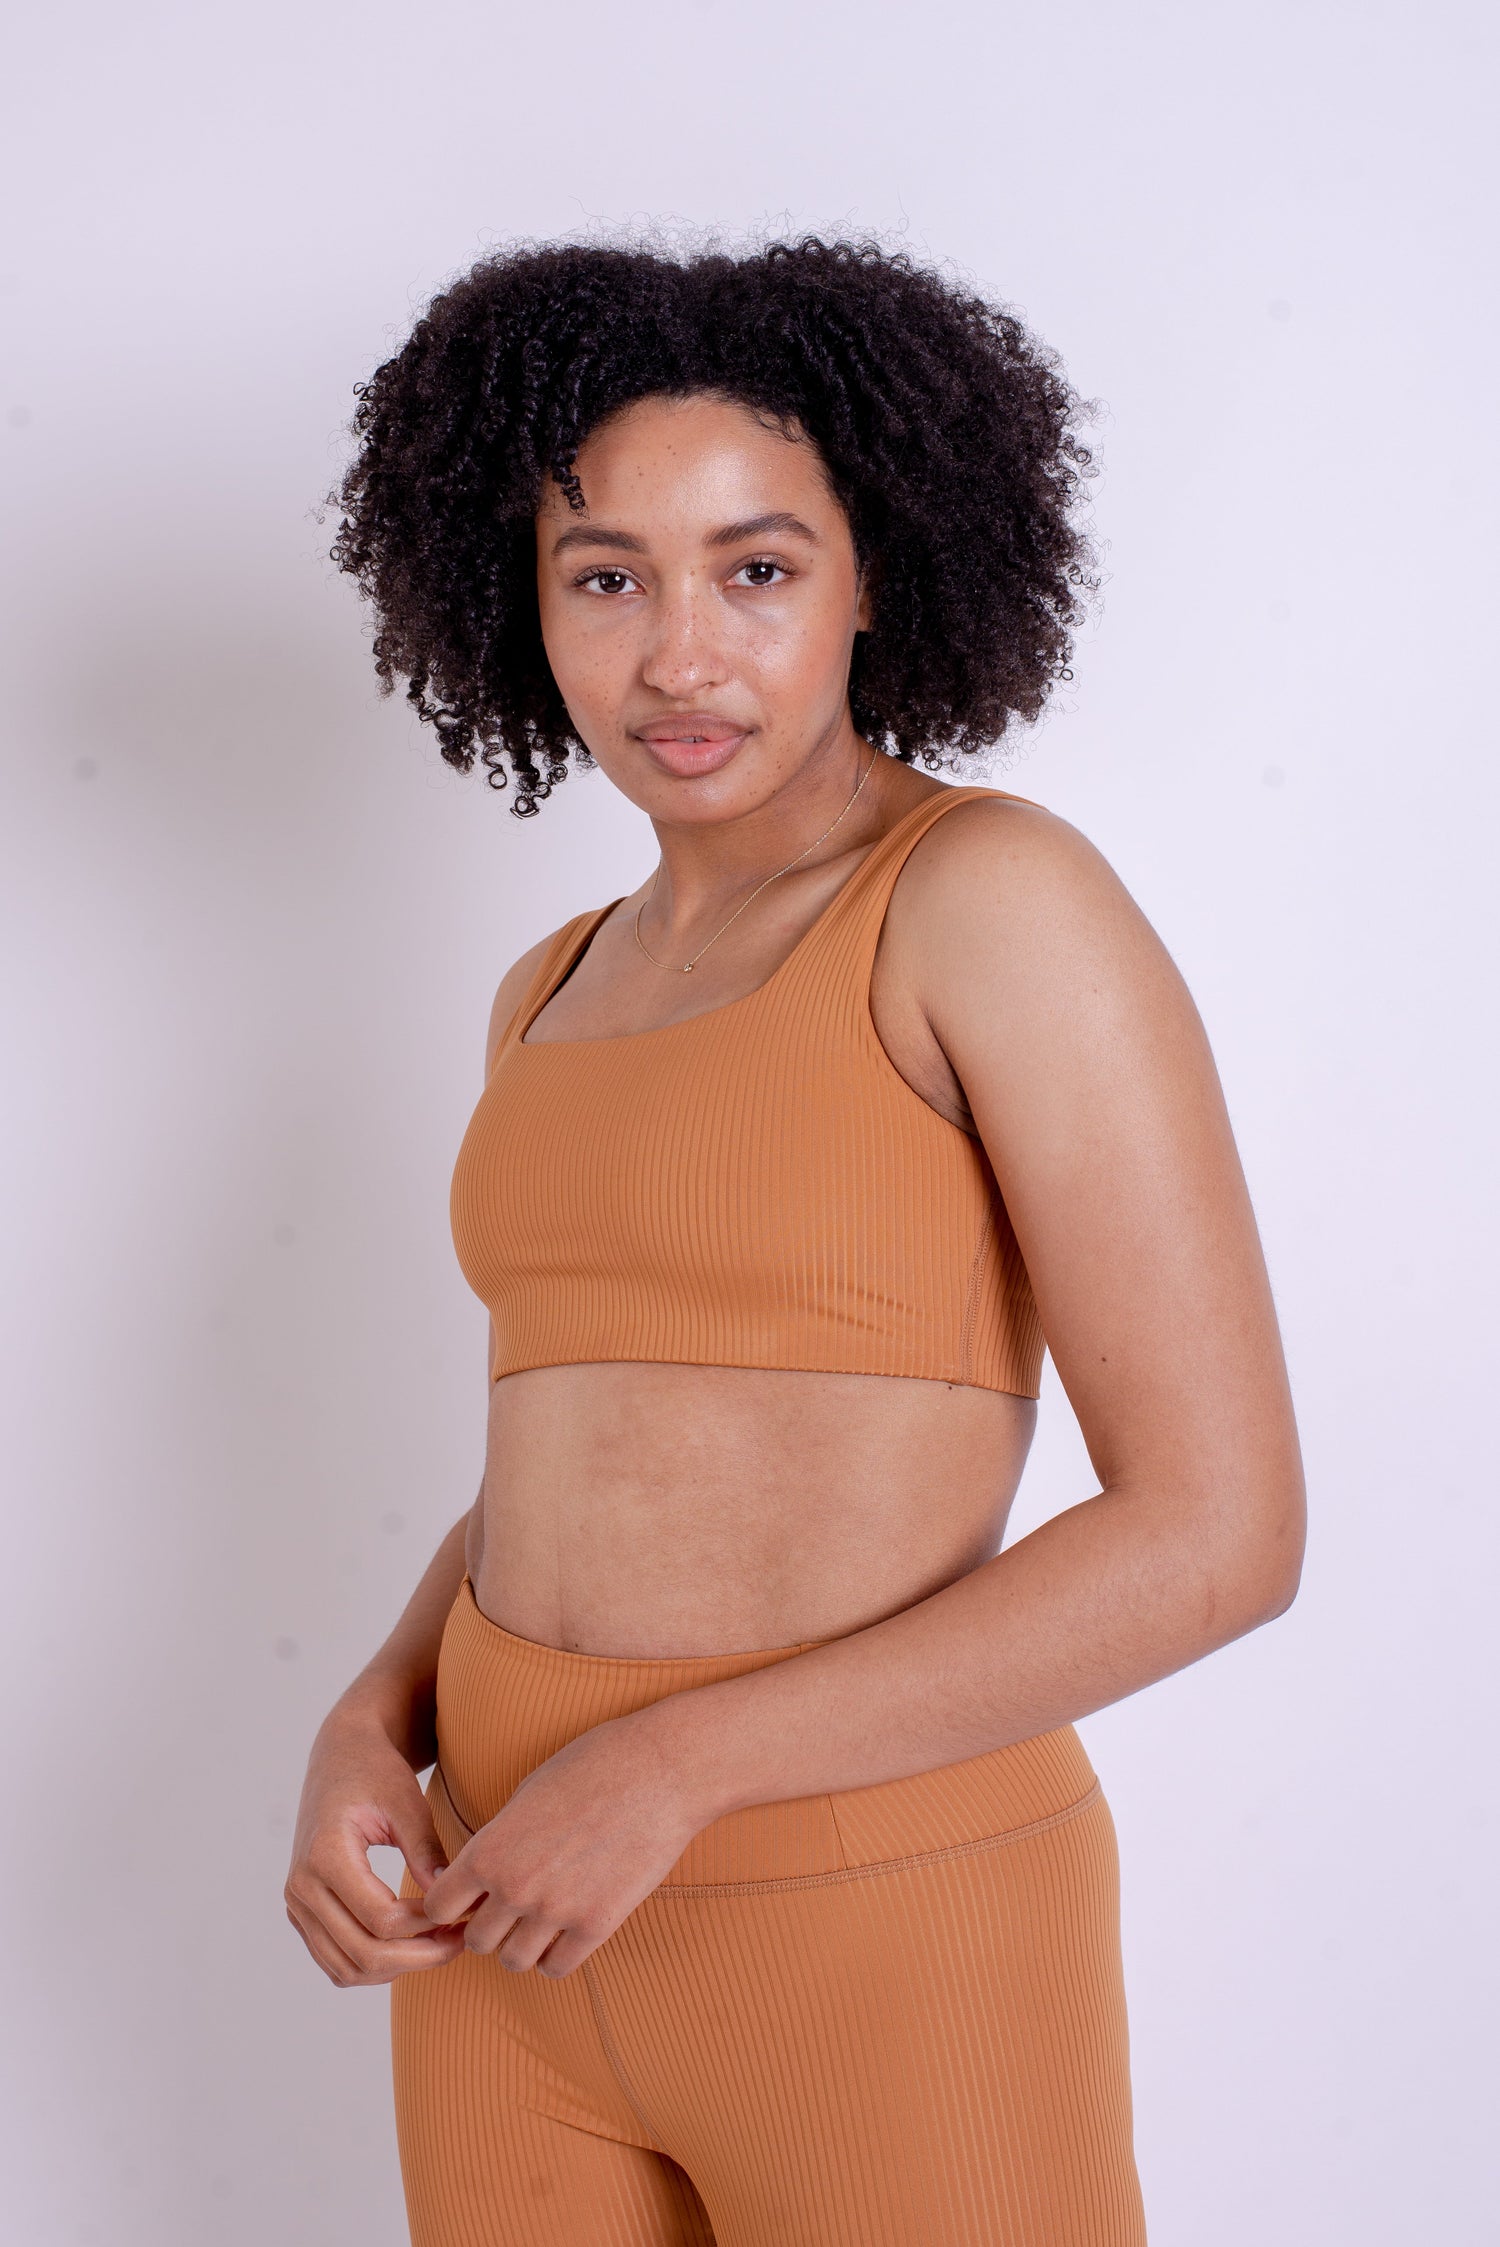 Girlfriend Collective RIB Tommy Bra - Made from Recycled Plastic Bottles Toffee 3XL Underwear